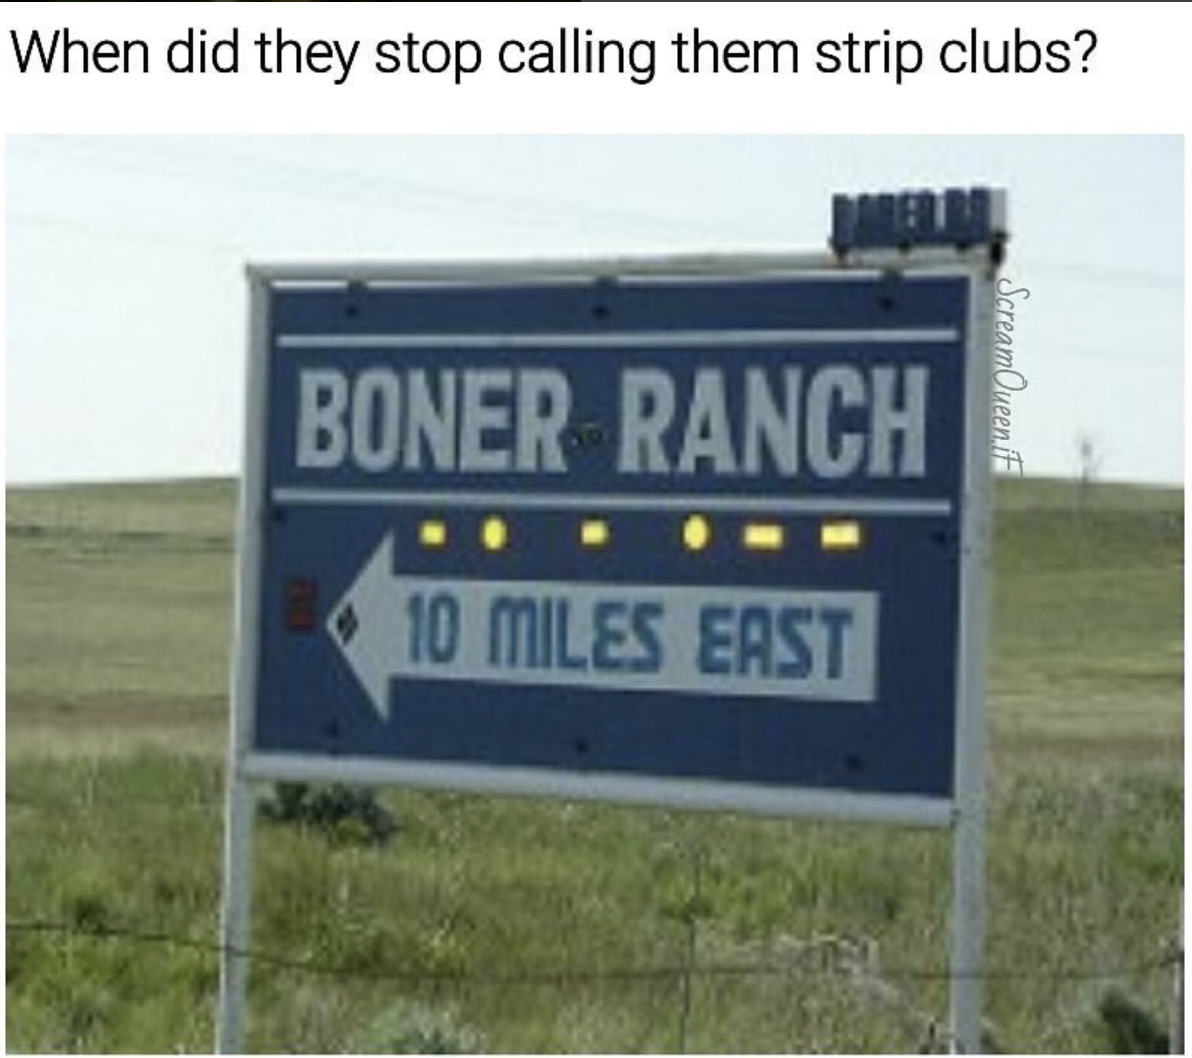 meme stream - street sign - When did they stop calling them strip clubs? Boner Ranch ScreamOverent 10 Miles East